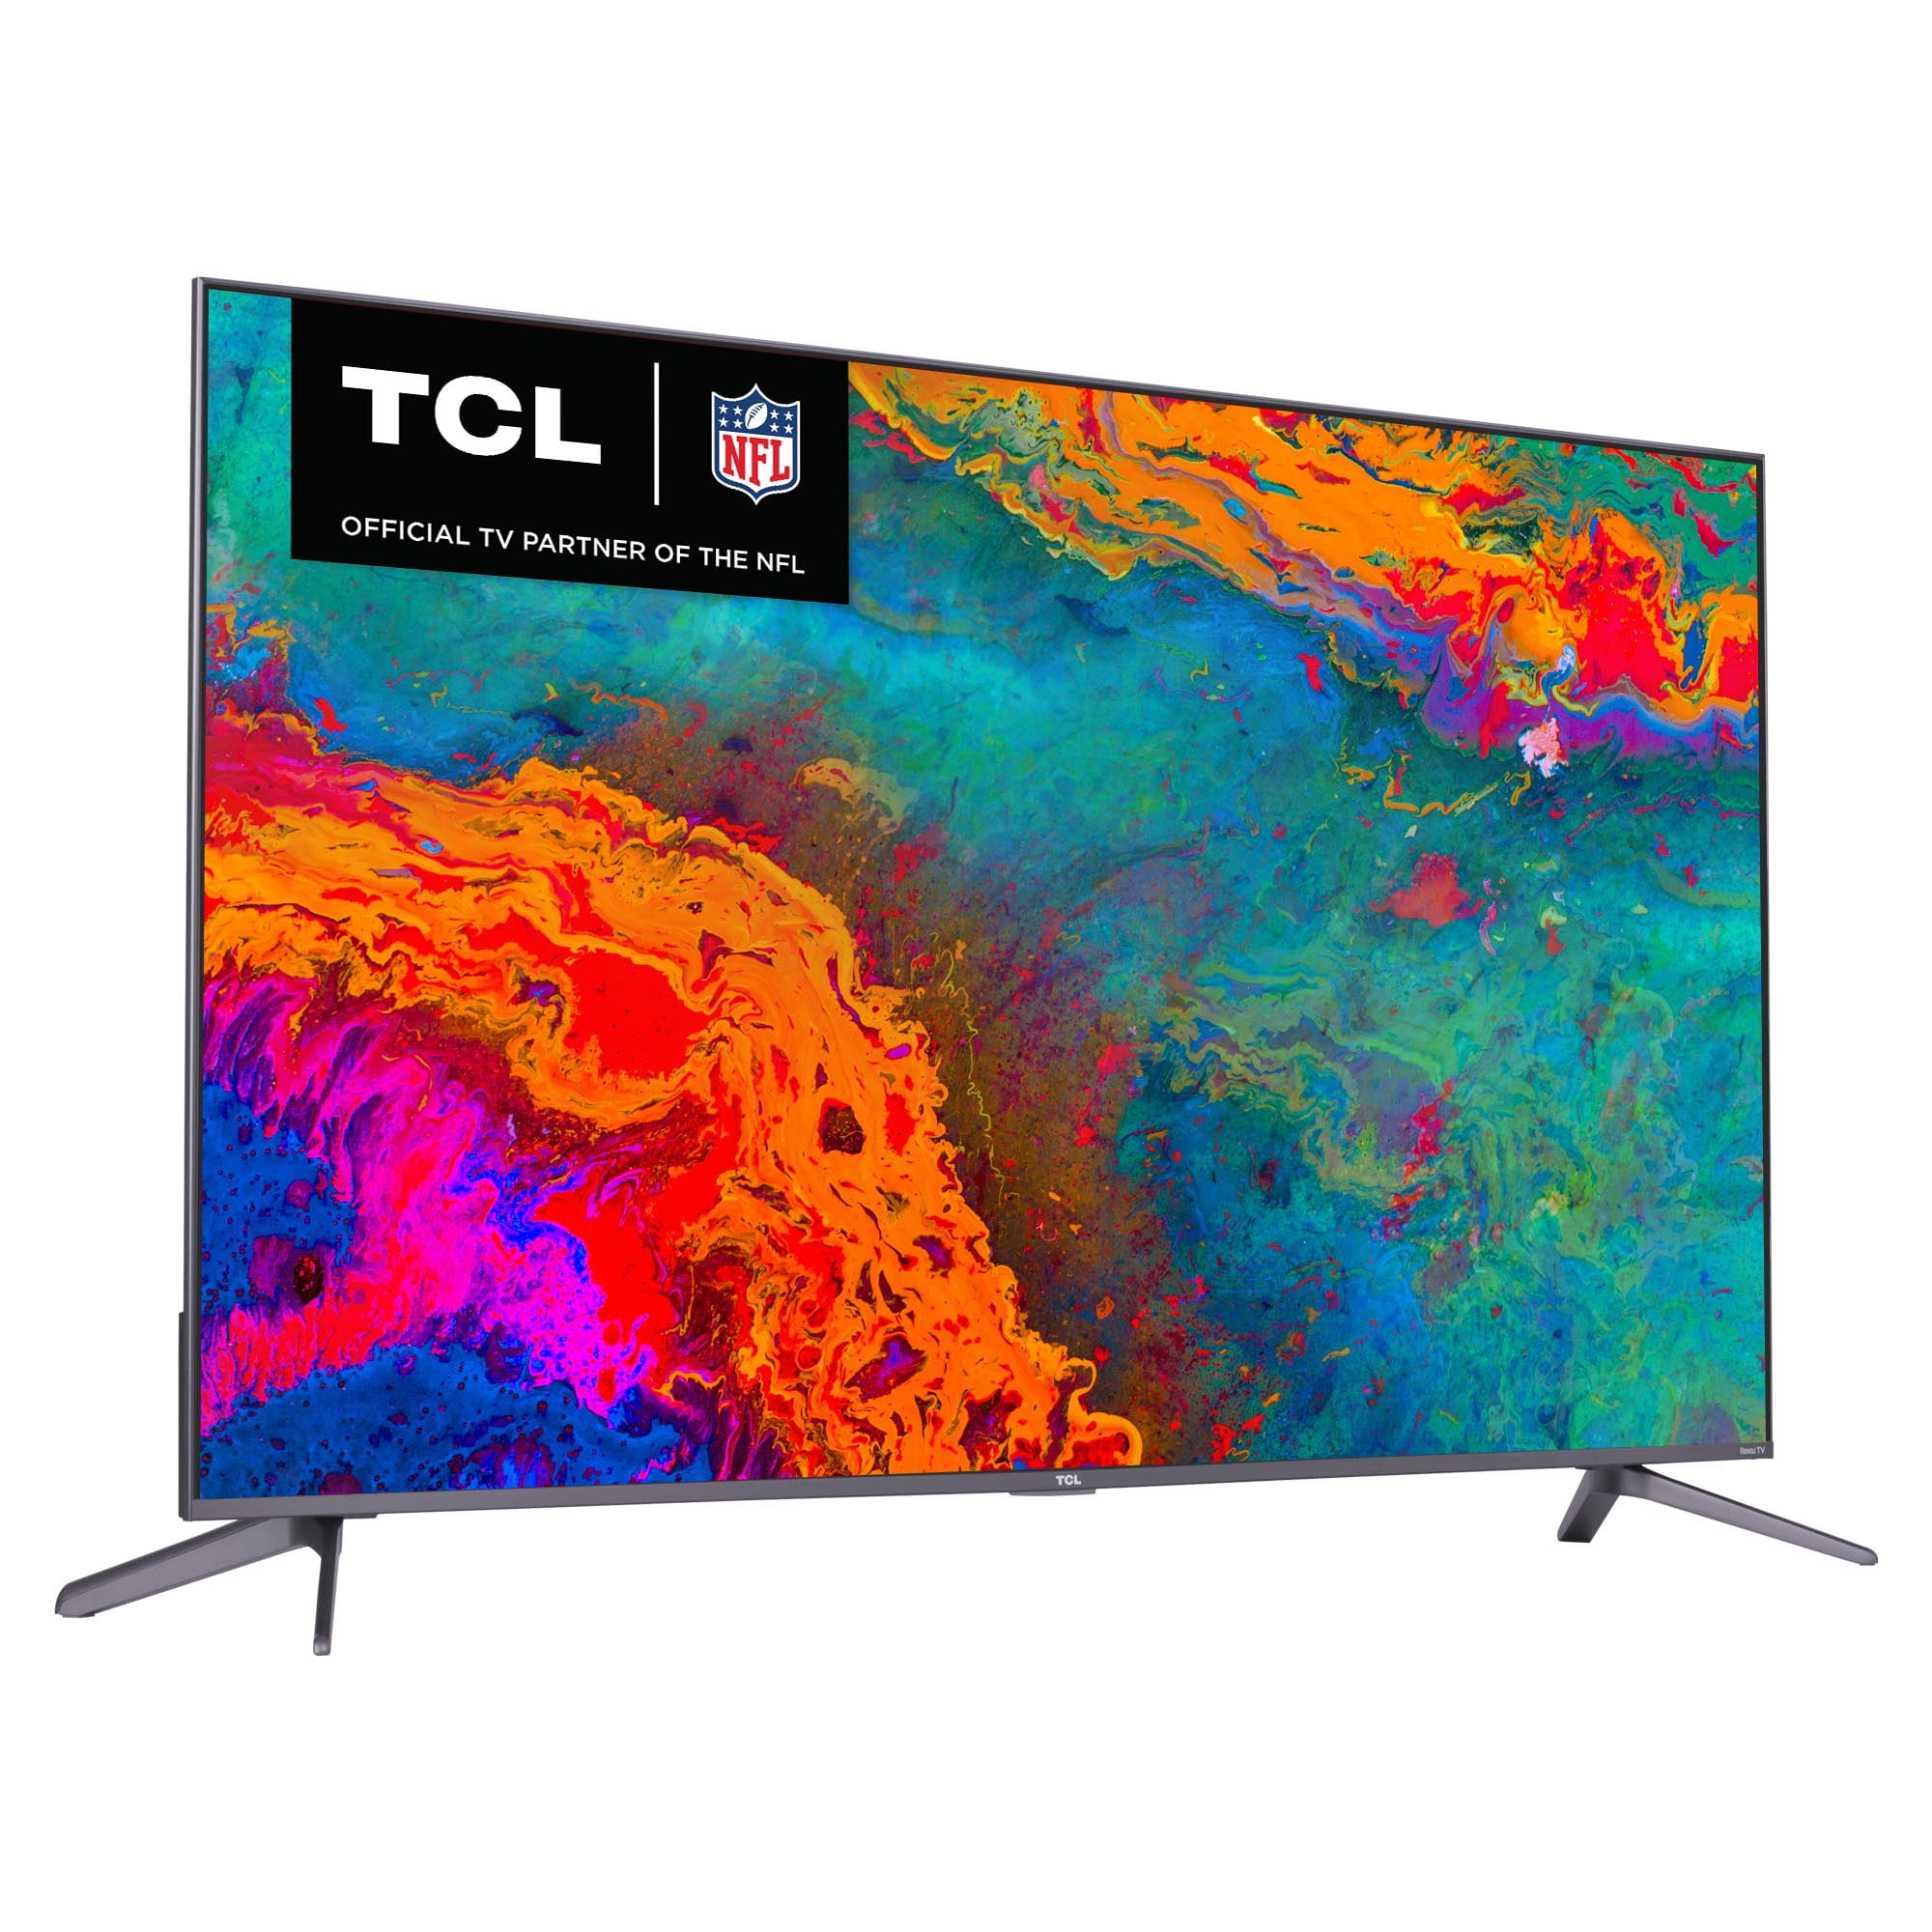 TCL 5-Series 4K TV review: This 43-inch smart TV delivers a good picture  for minimal moola